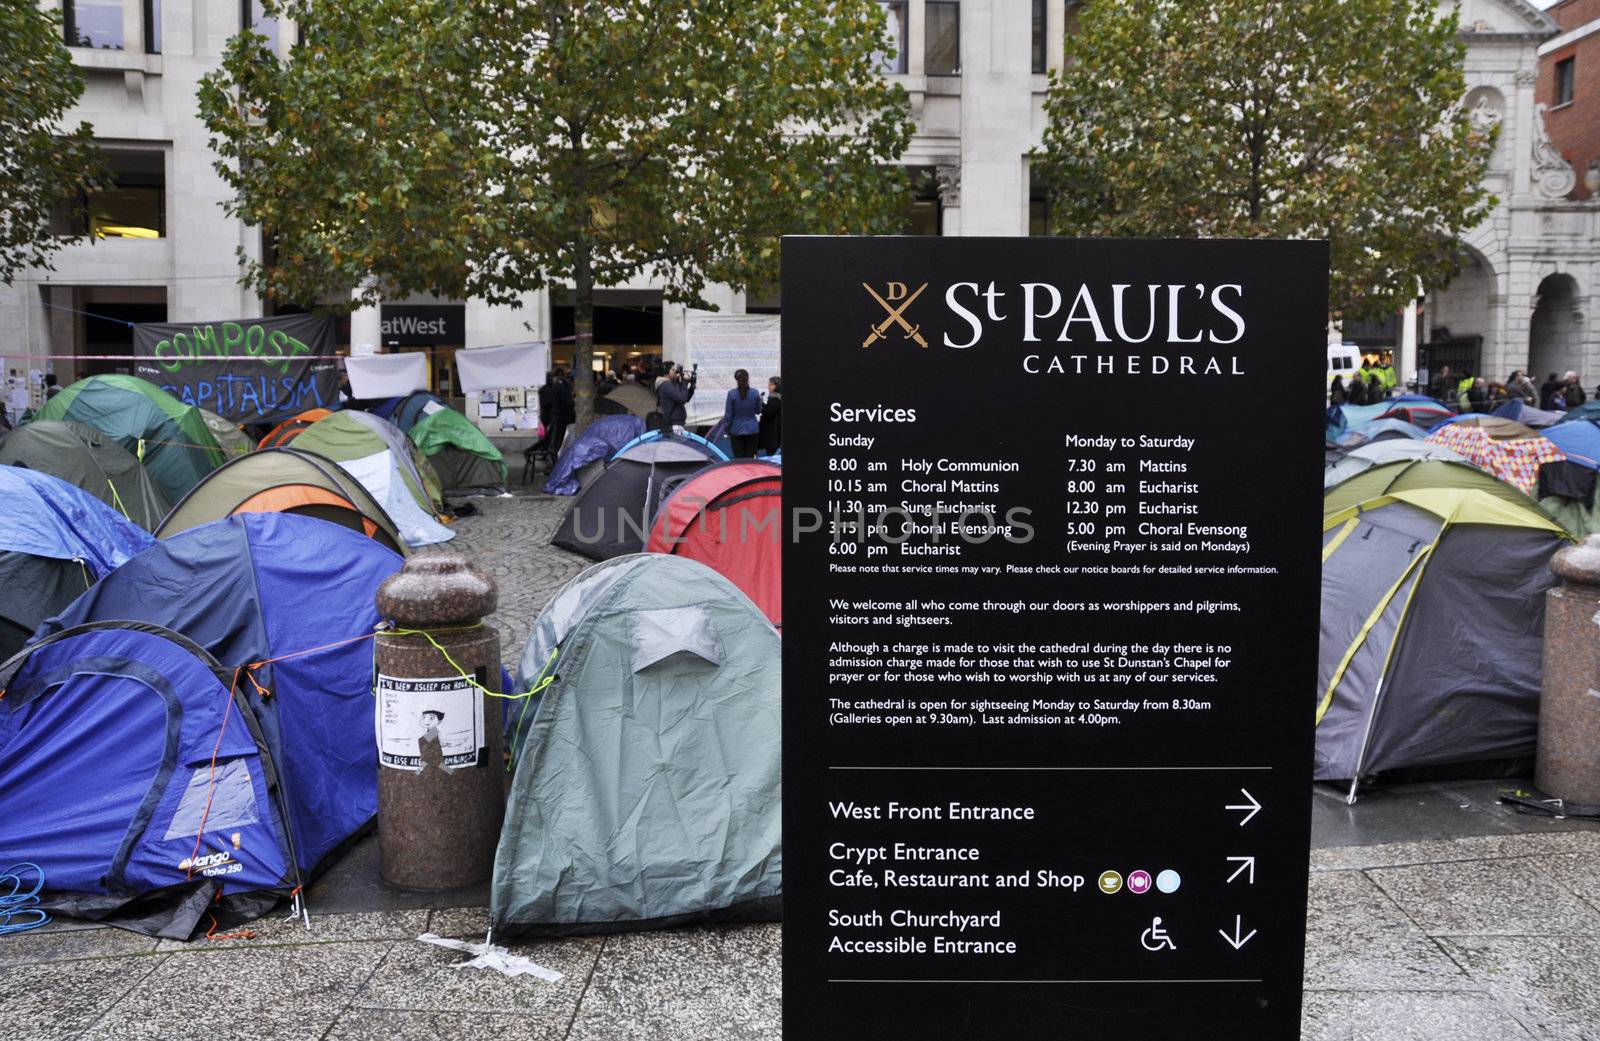 Occupy London encampment at St Paul's Cathedral on October 27, 2011 by dutourdumonde